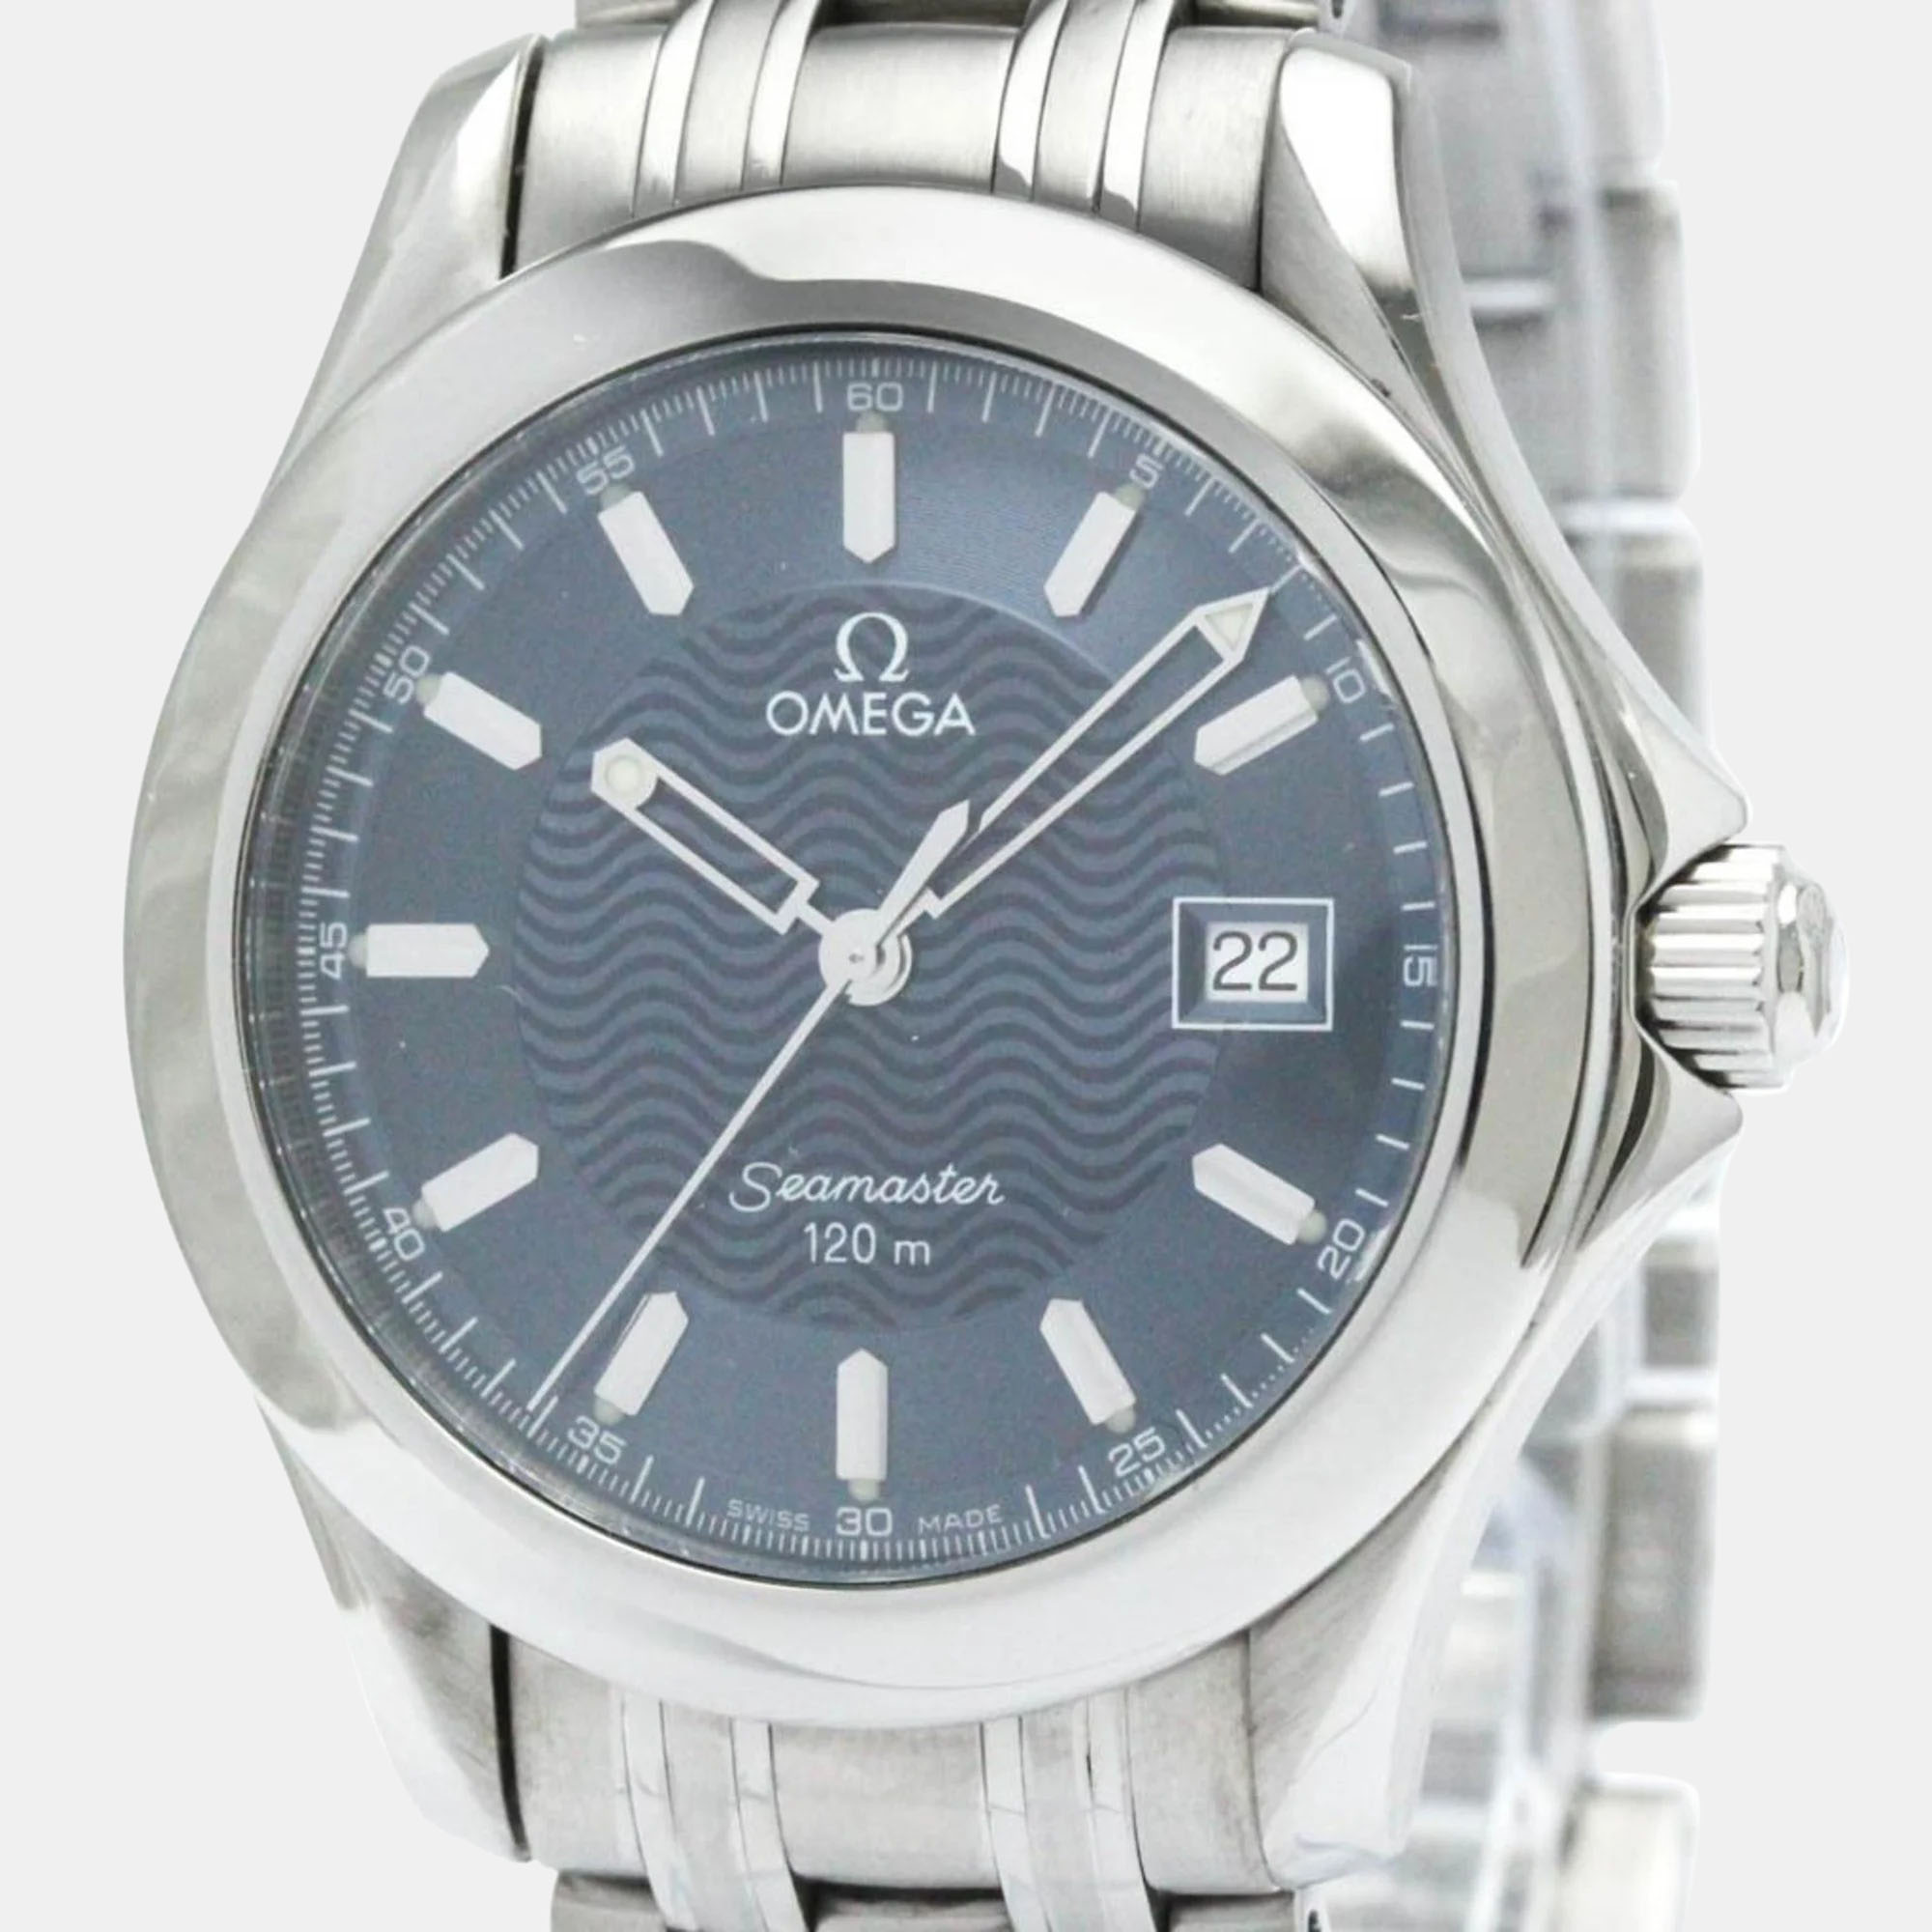 Pre-owned Omega Blue Stainless Steel Seamaster 2511.81 Quartz Men's Wristwatch 36 Mm